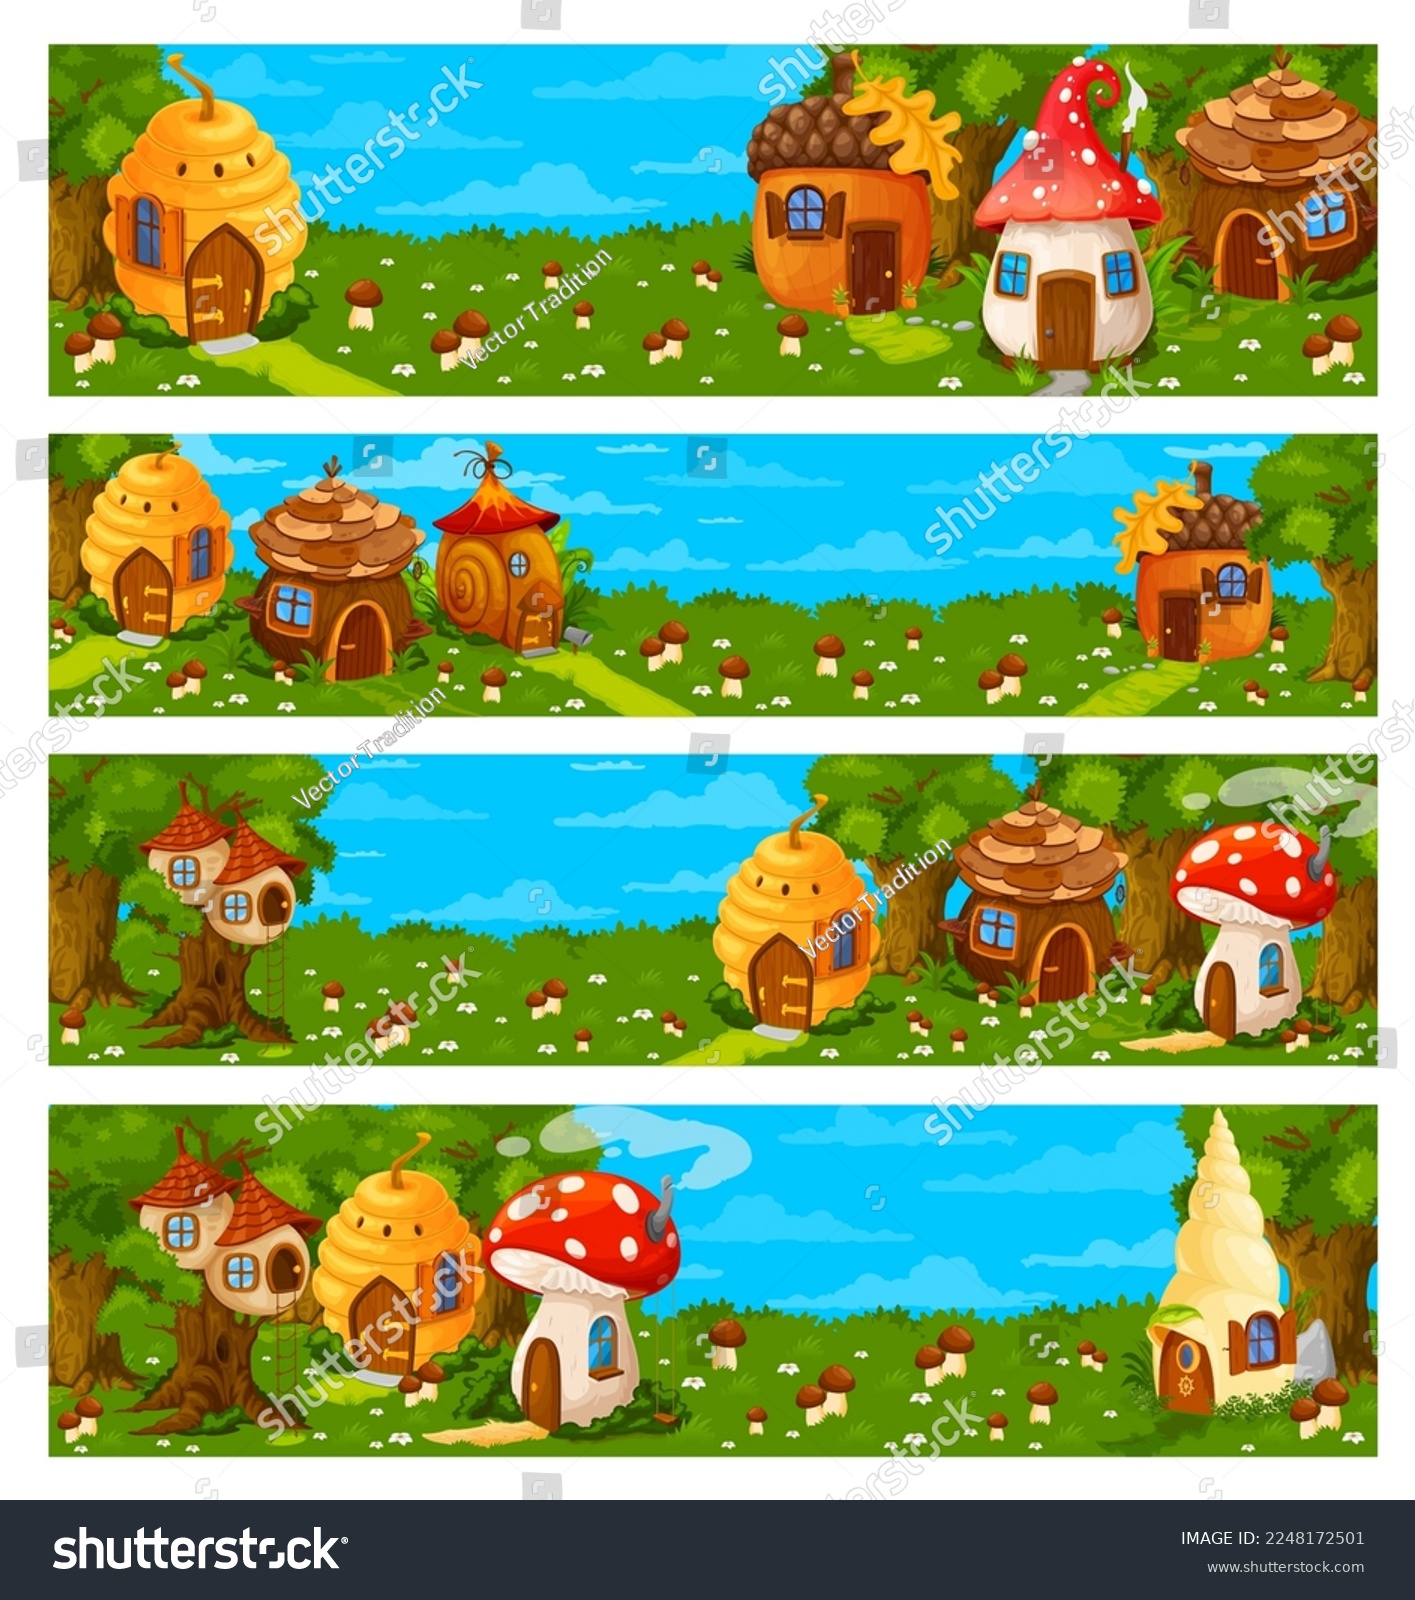 SVG of Game level landscape cartoon fairy houses and dwellings. Game level environment vector backgrounds with fairy creature hive, mushroom and snail shell dwellings, hobbit forest house or huts svg